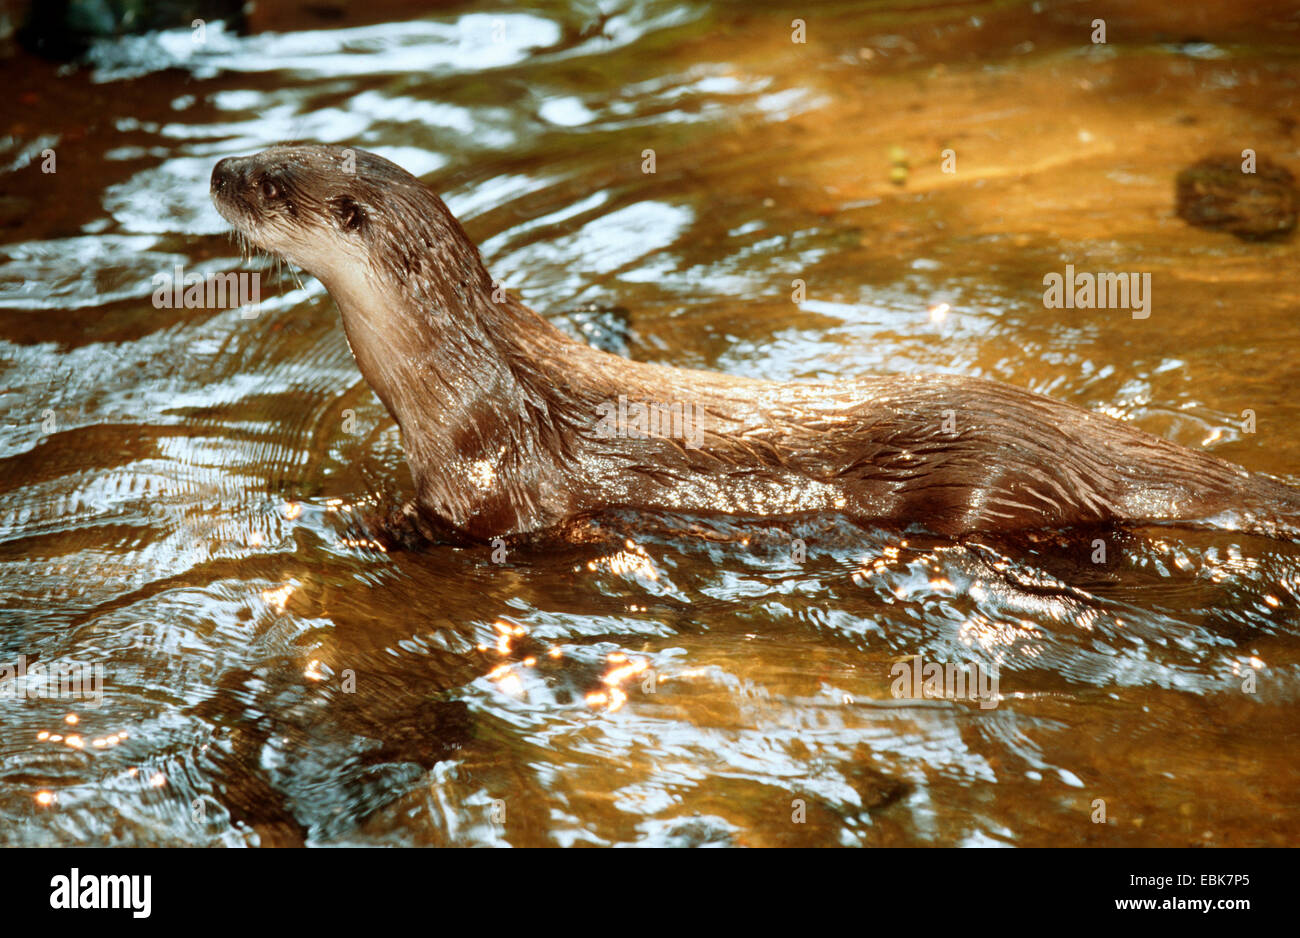 North American river otter, Canadian otter (Lutra canadensis), standing in the shallow water of a river Stock Photo